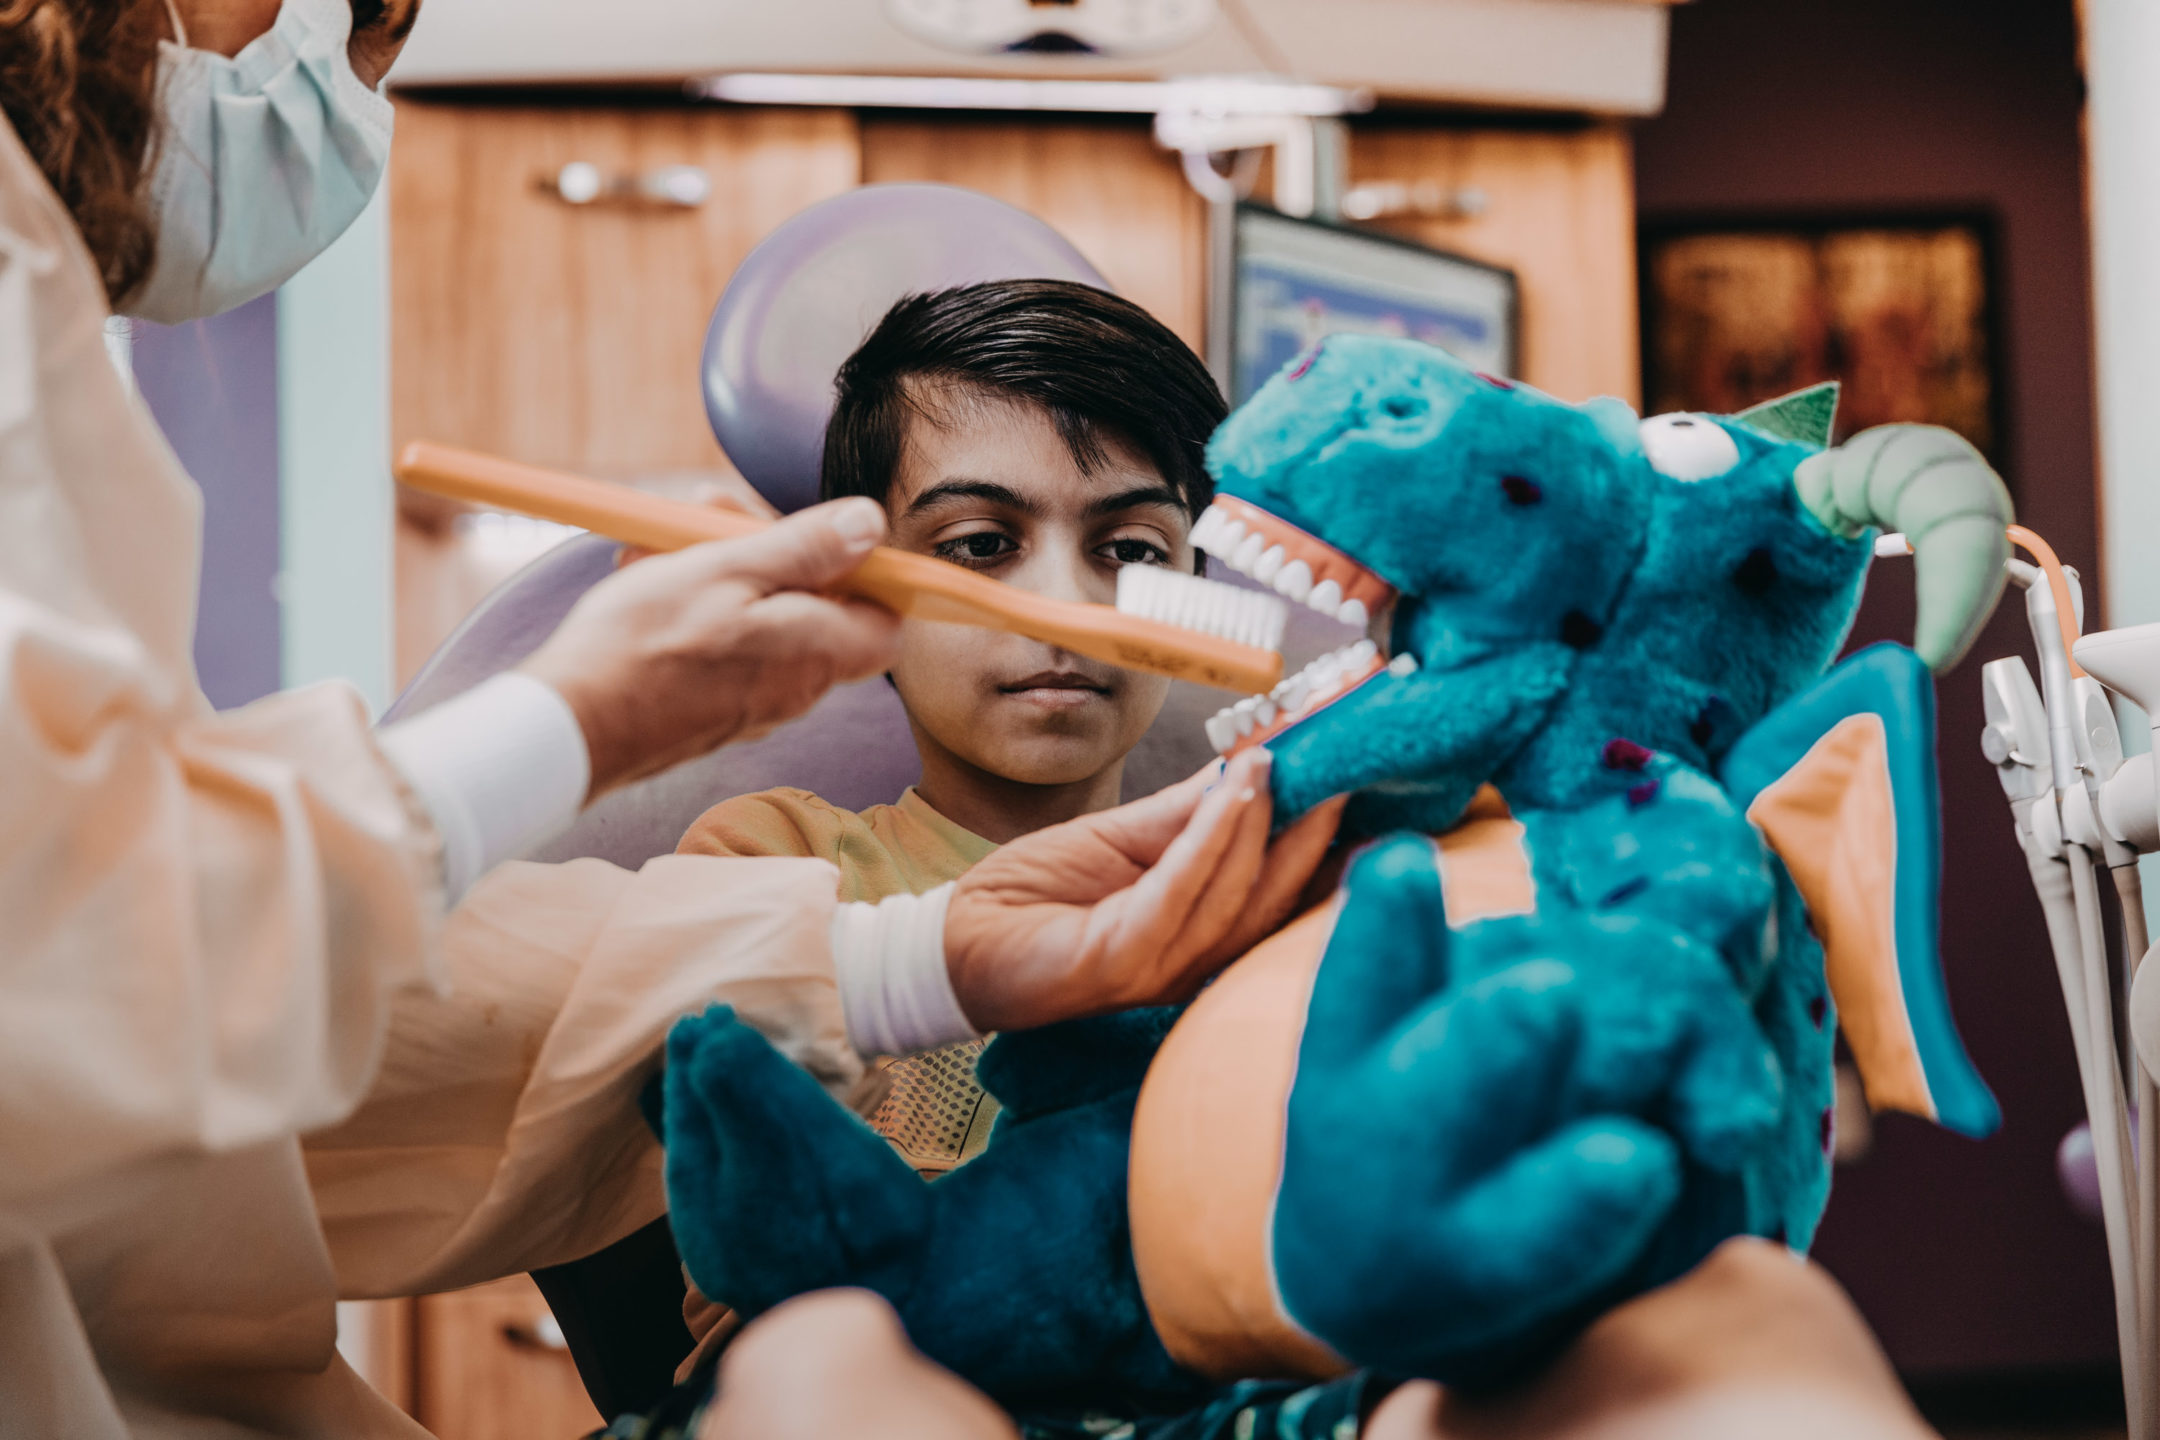 Dentist shows a young boy how to properly brush teeth using a plush mascot for demonstration